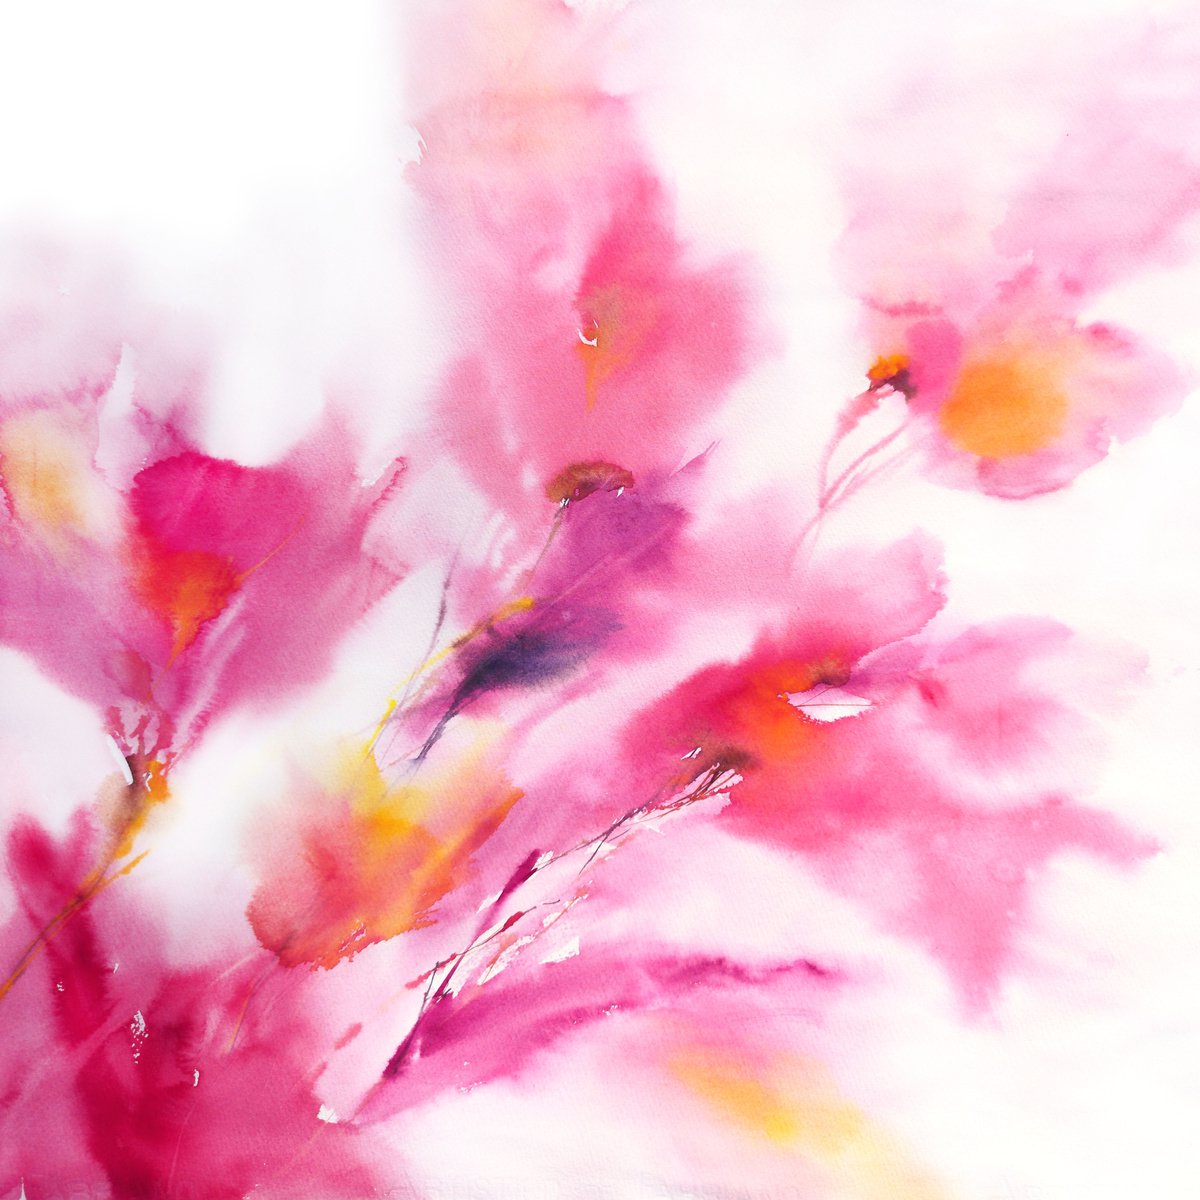 Pink abstract flowers, magenta watercolor floral painting by Olya Grigo